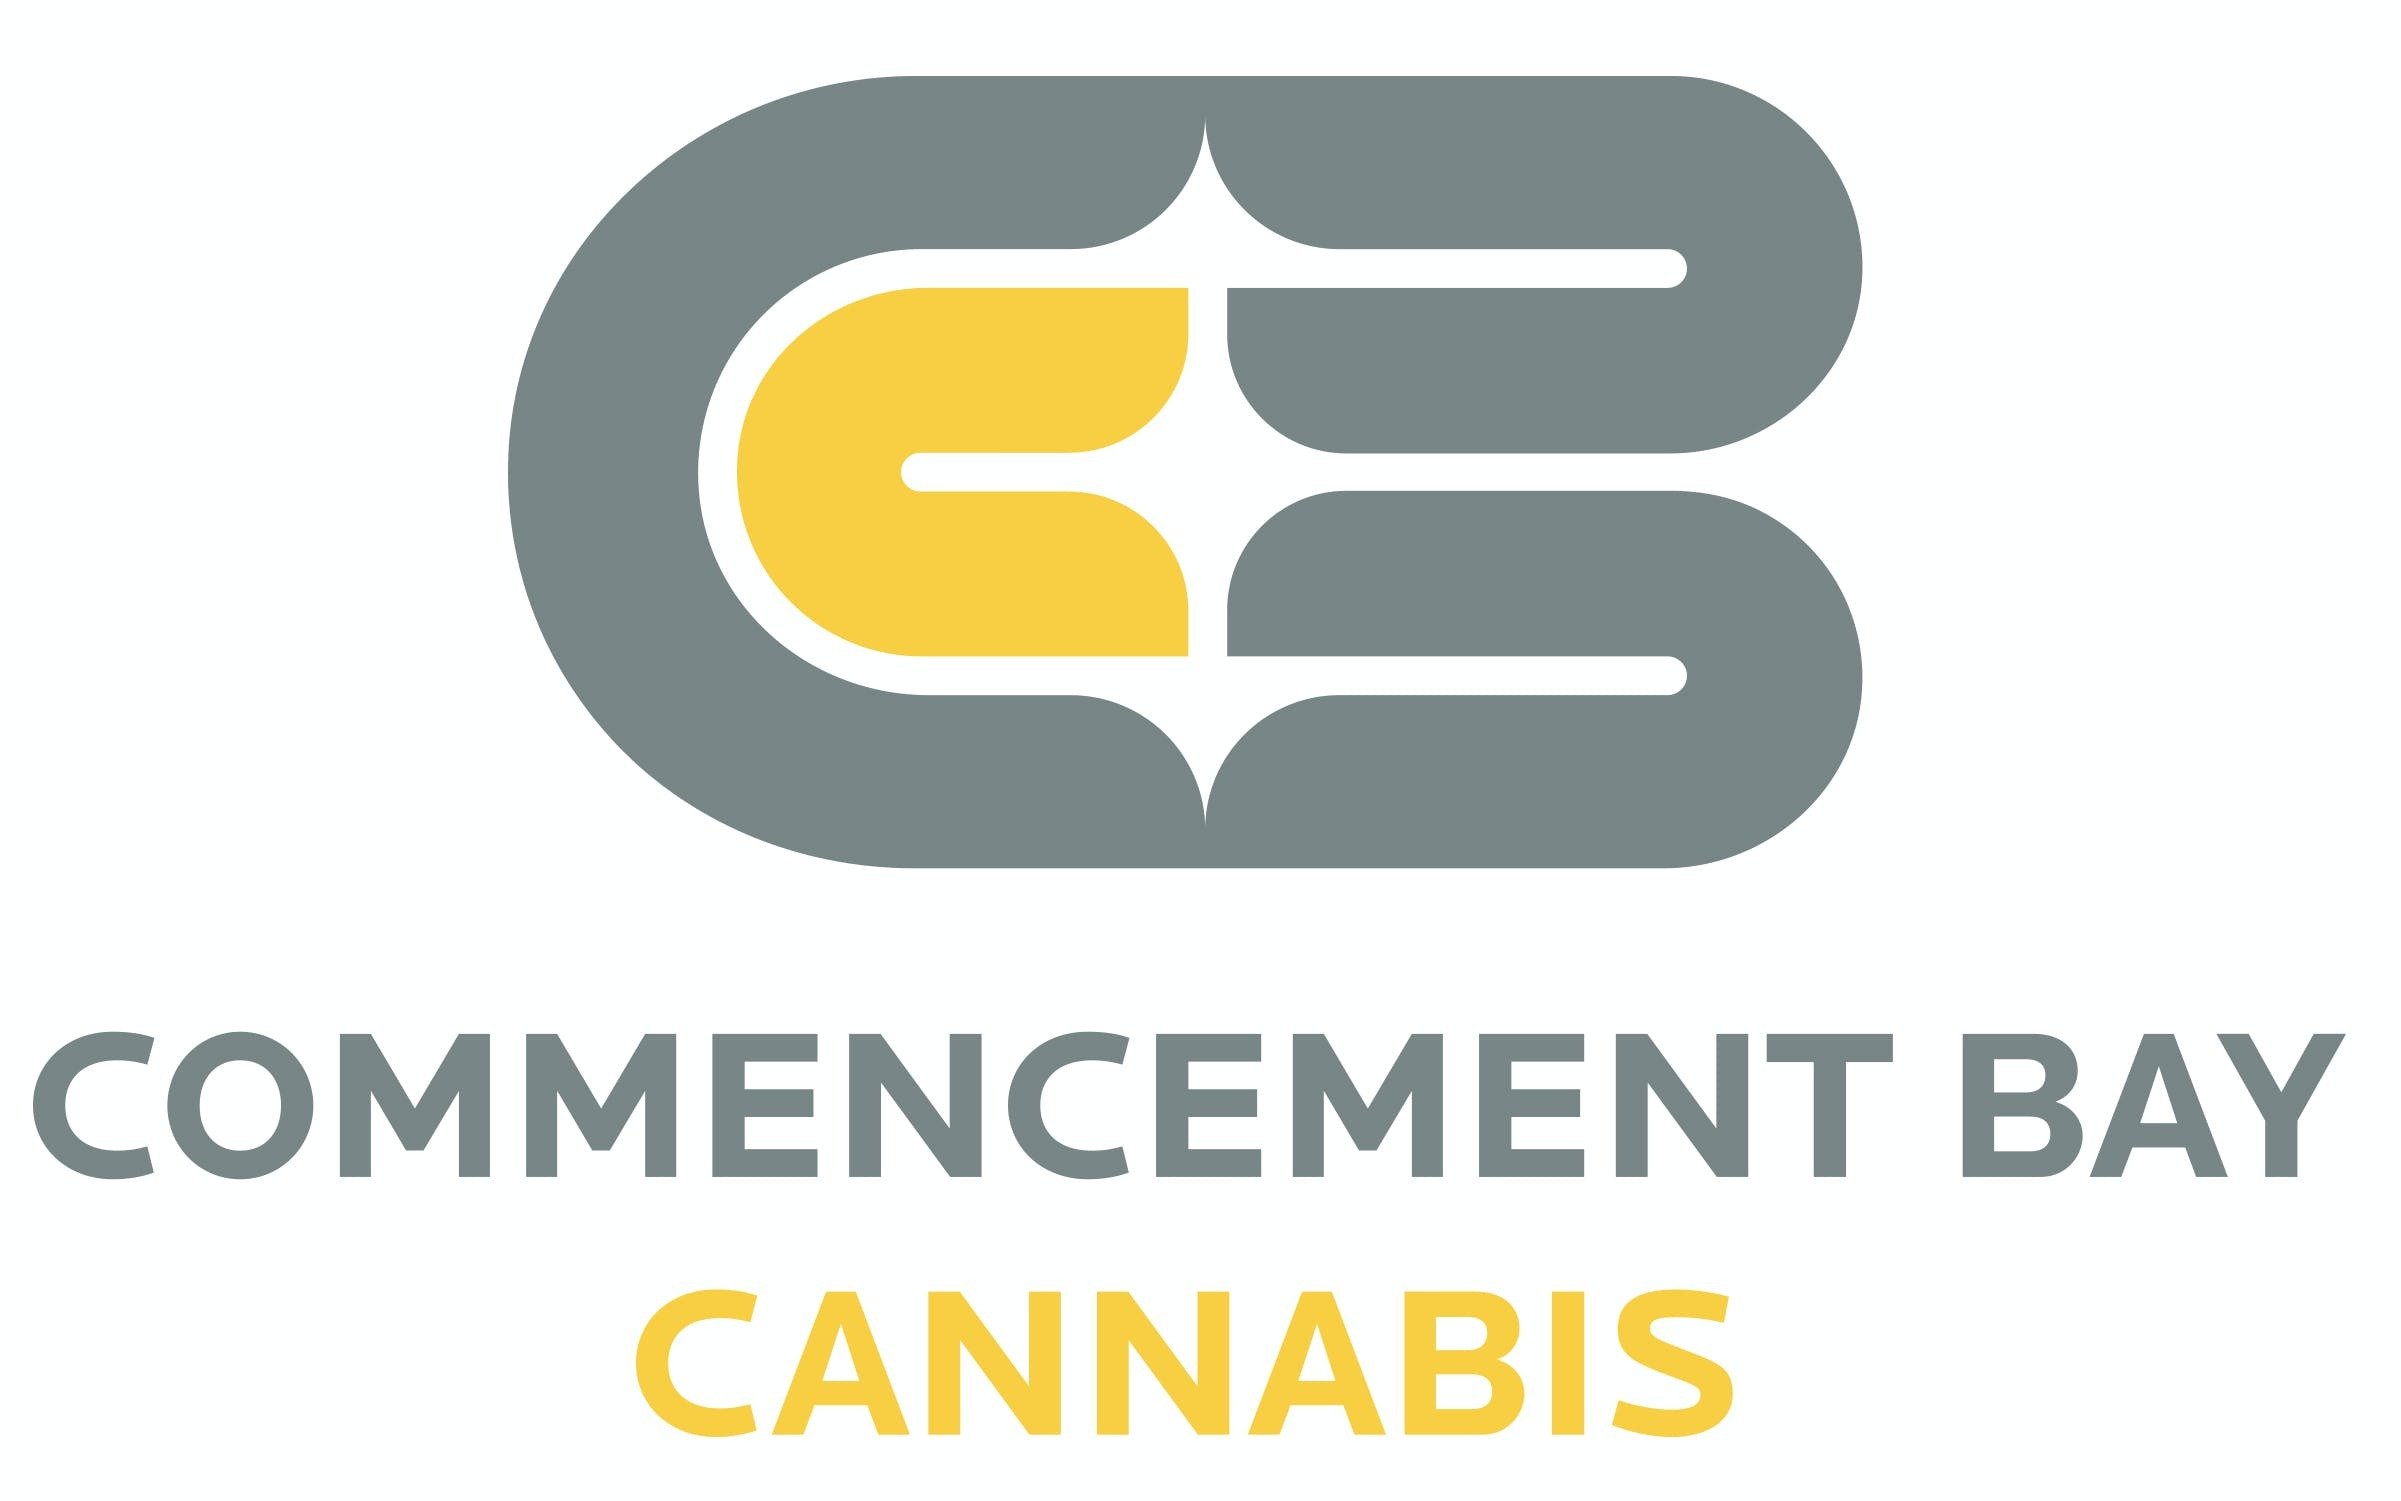 Commencement Bay Cannabis - Yellow logo